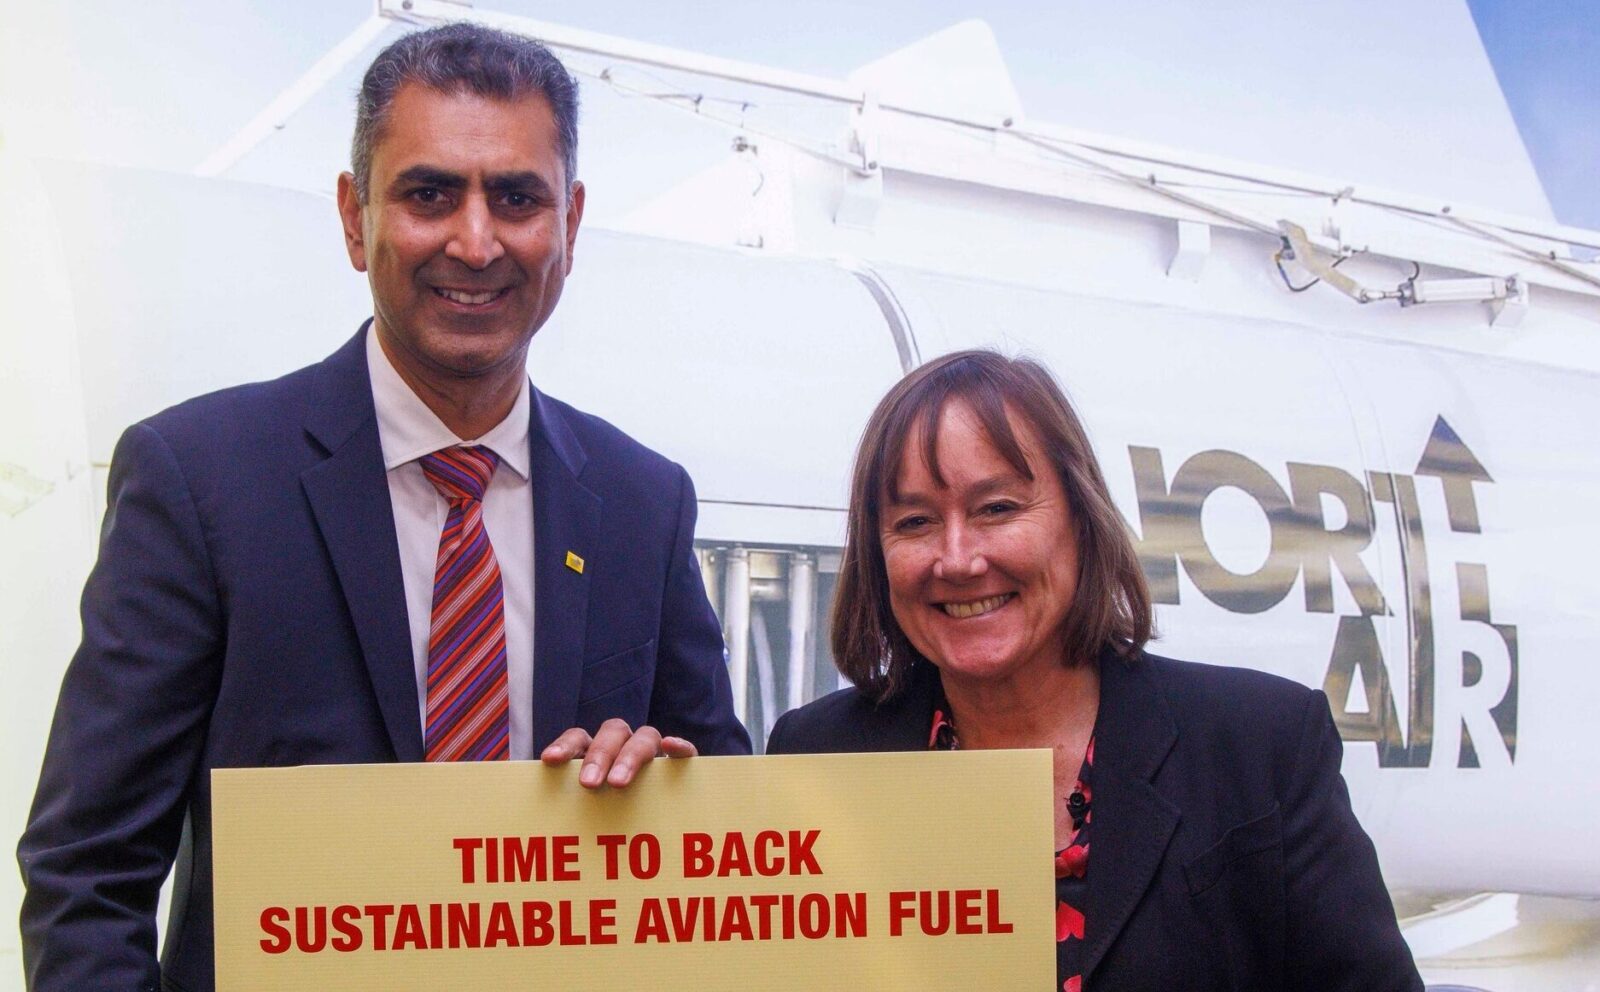 Time to back Sustainable Aviation Fuel